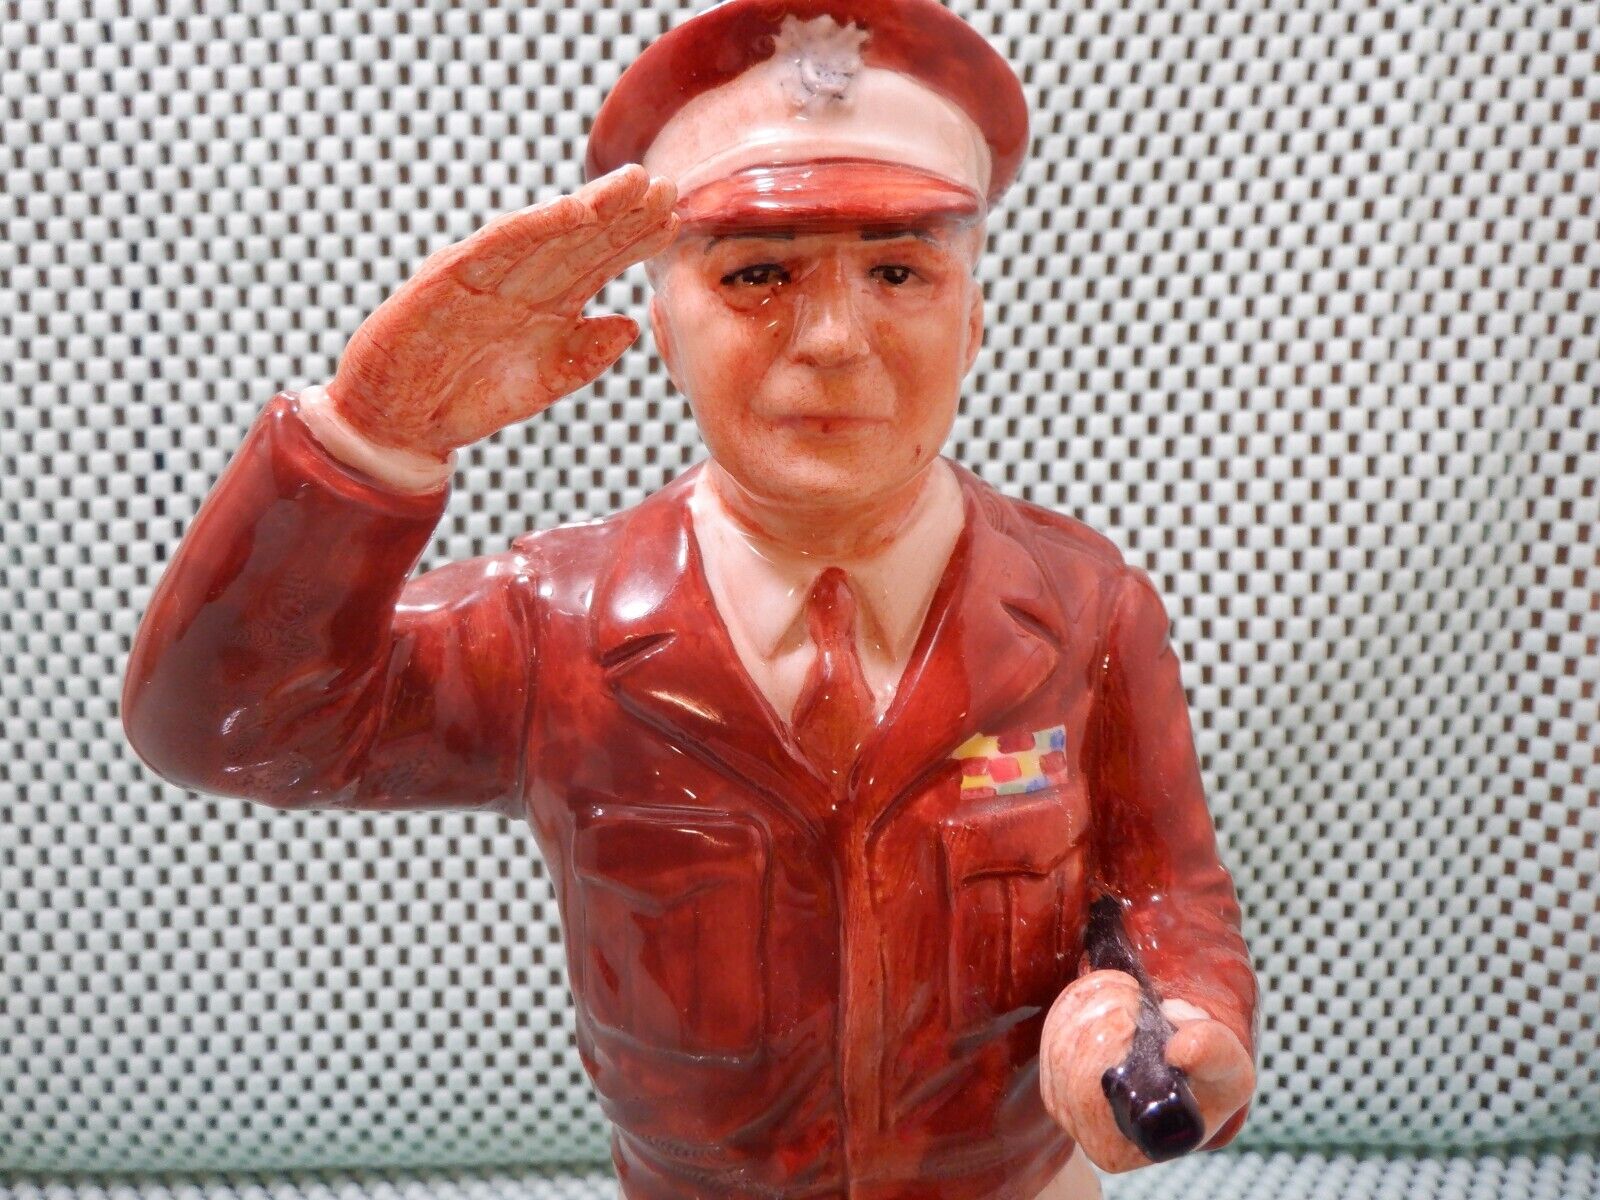 Kevin Francis General Eisenhower 1992 Limited Edition Toby Jug #10 of 750